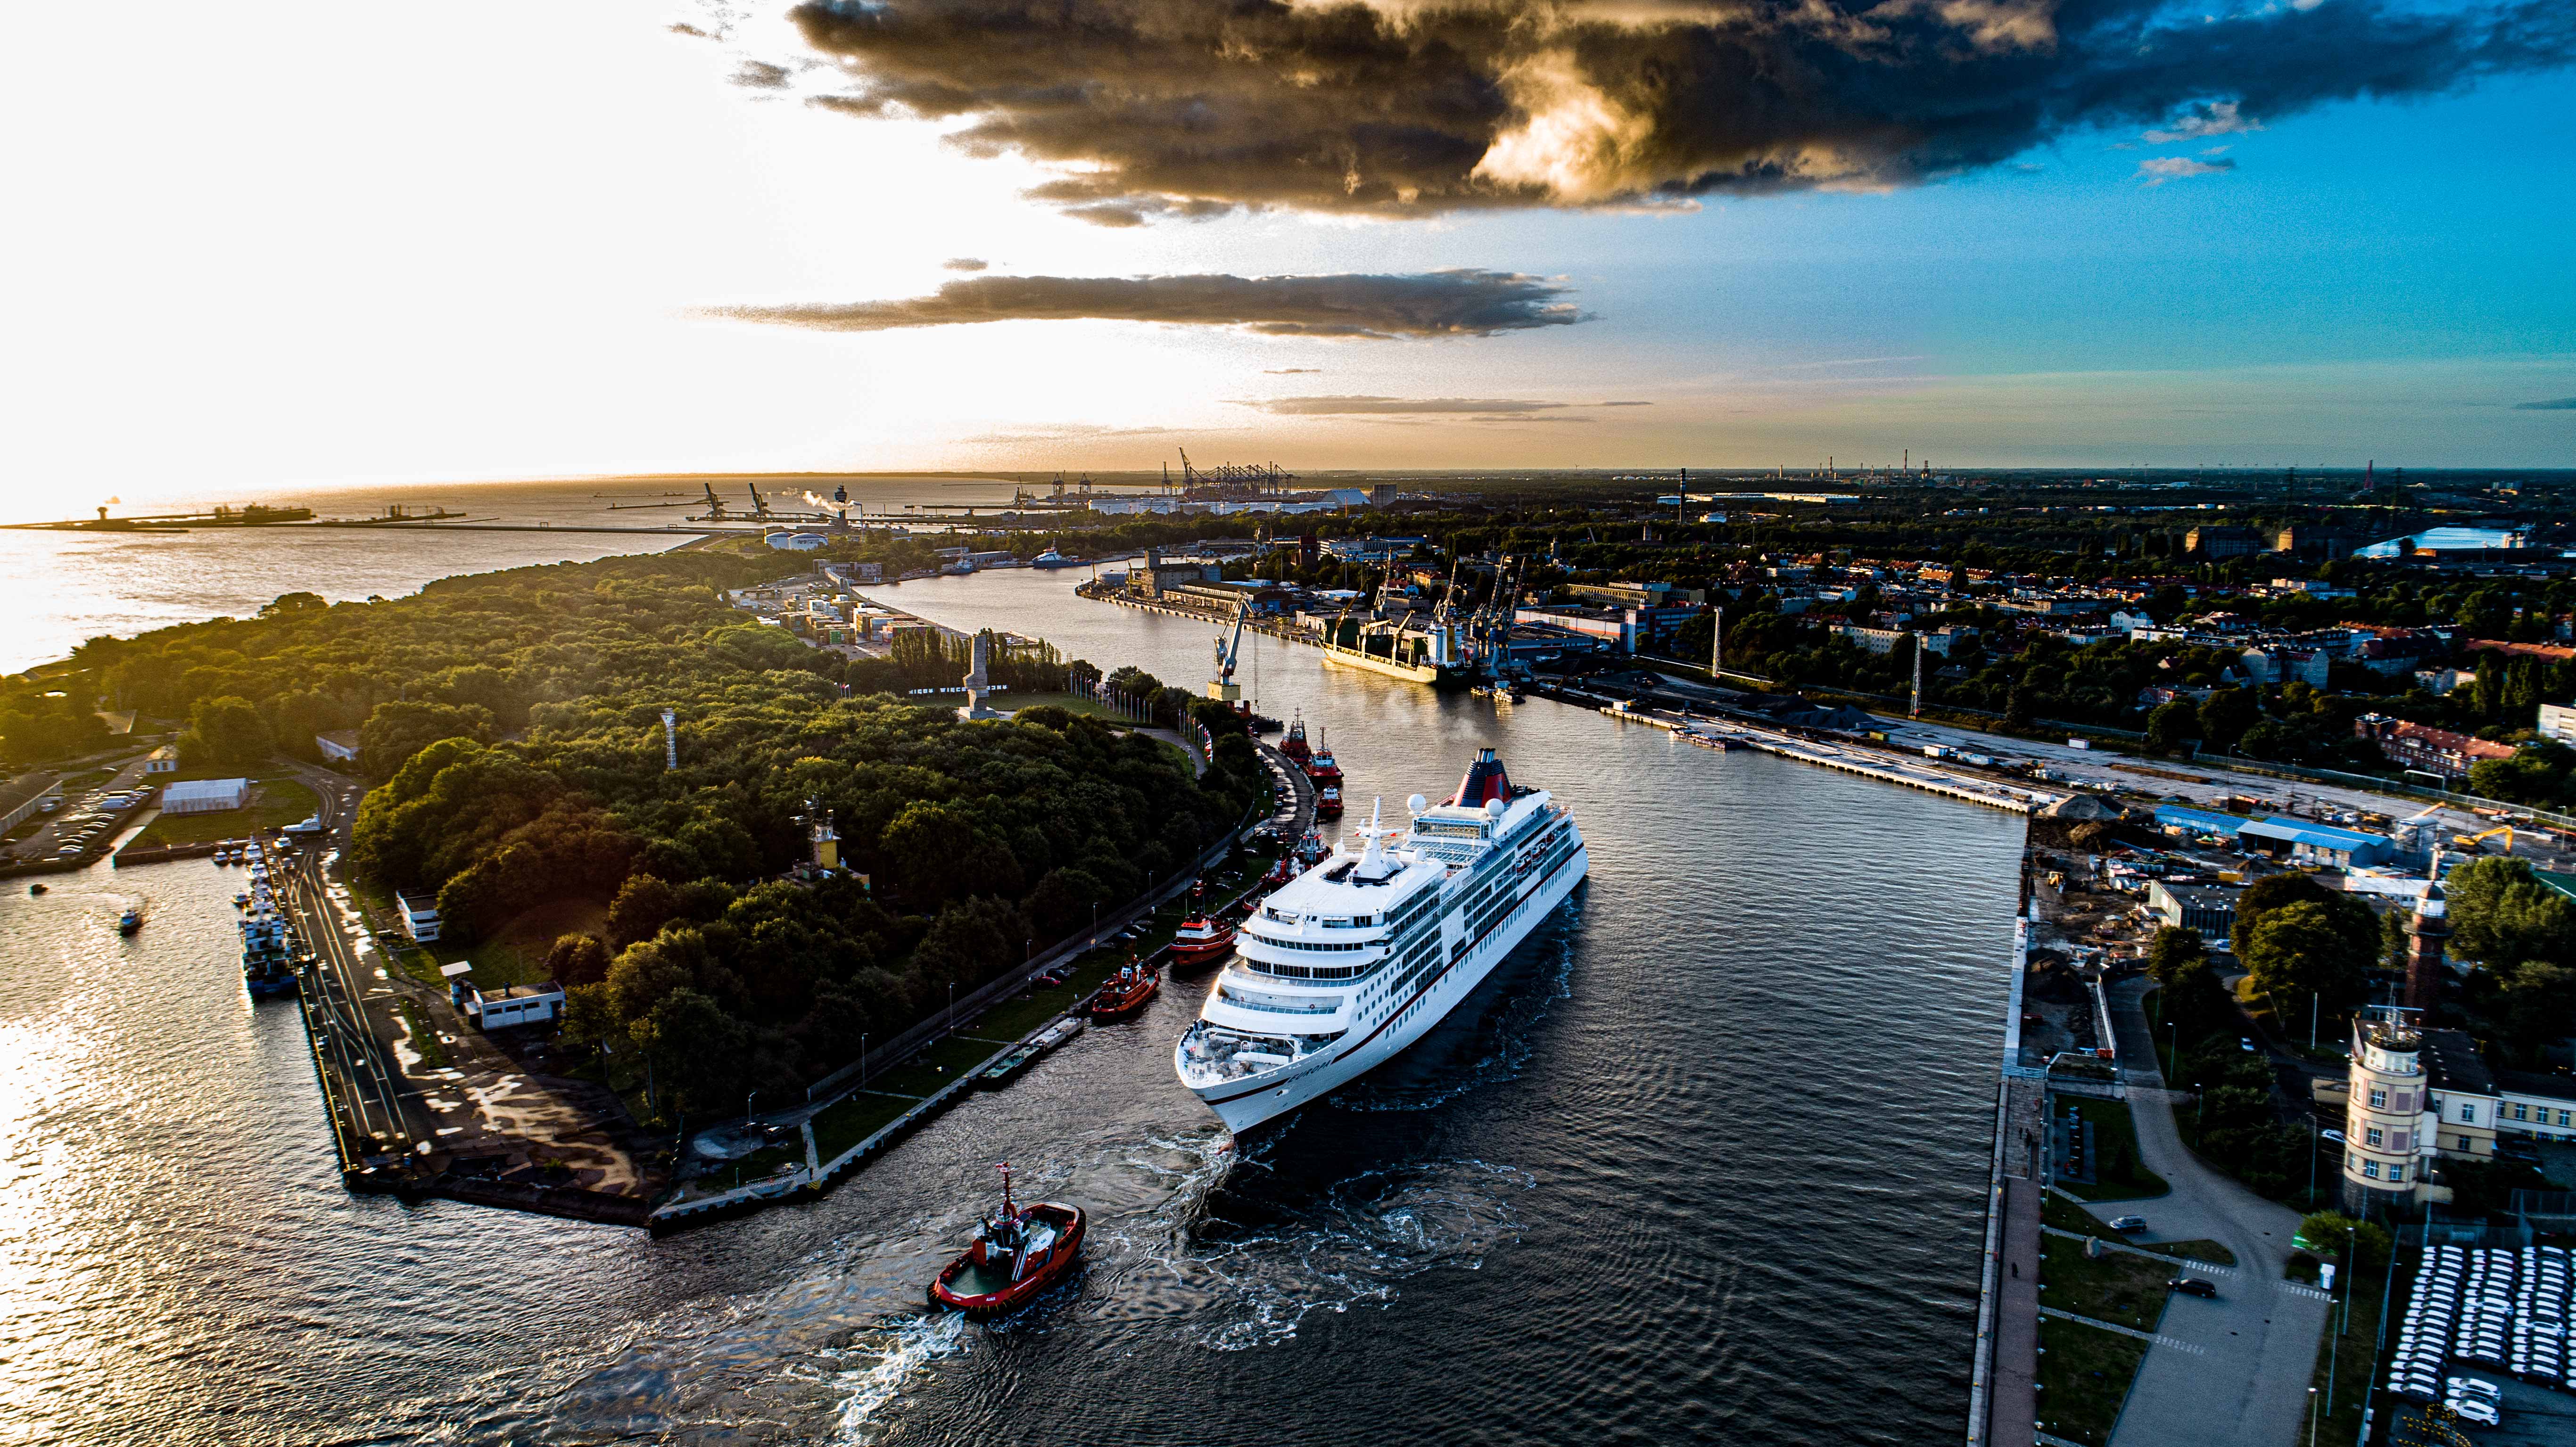 The first cruise ship of the season at the Port of Gdansk - MarinePoland.com